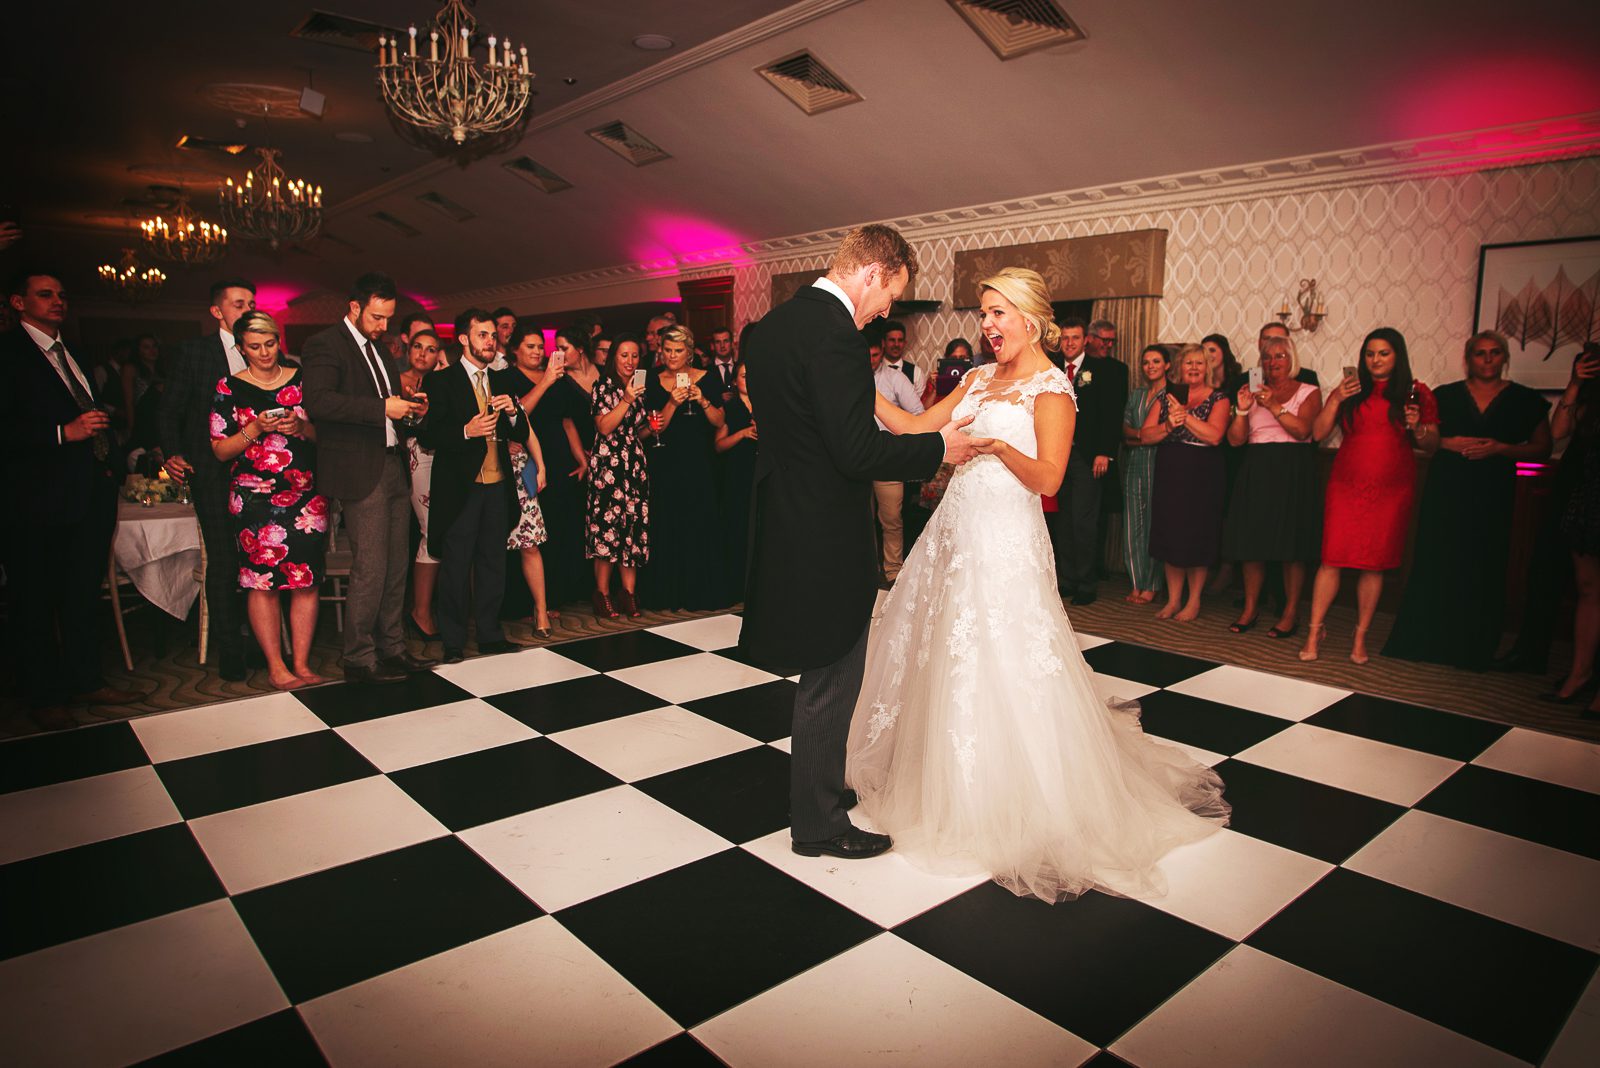 A bride and groom take their first dance on a chequered dance floor.